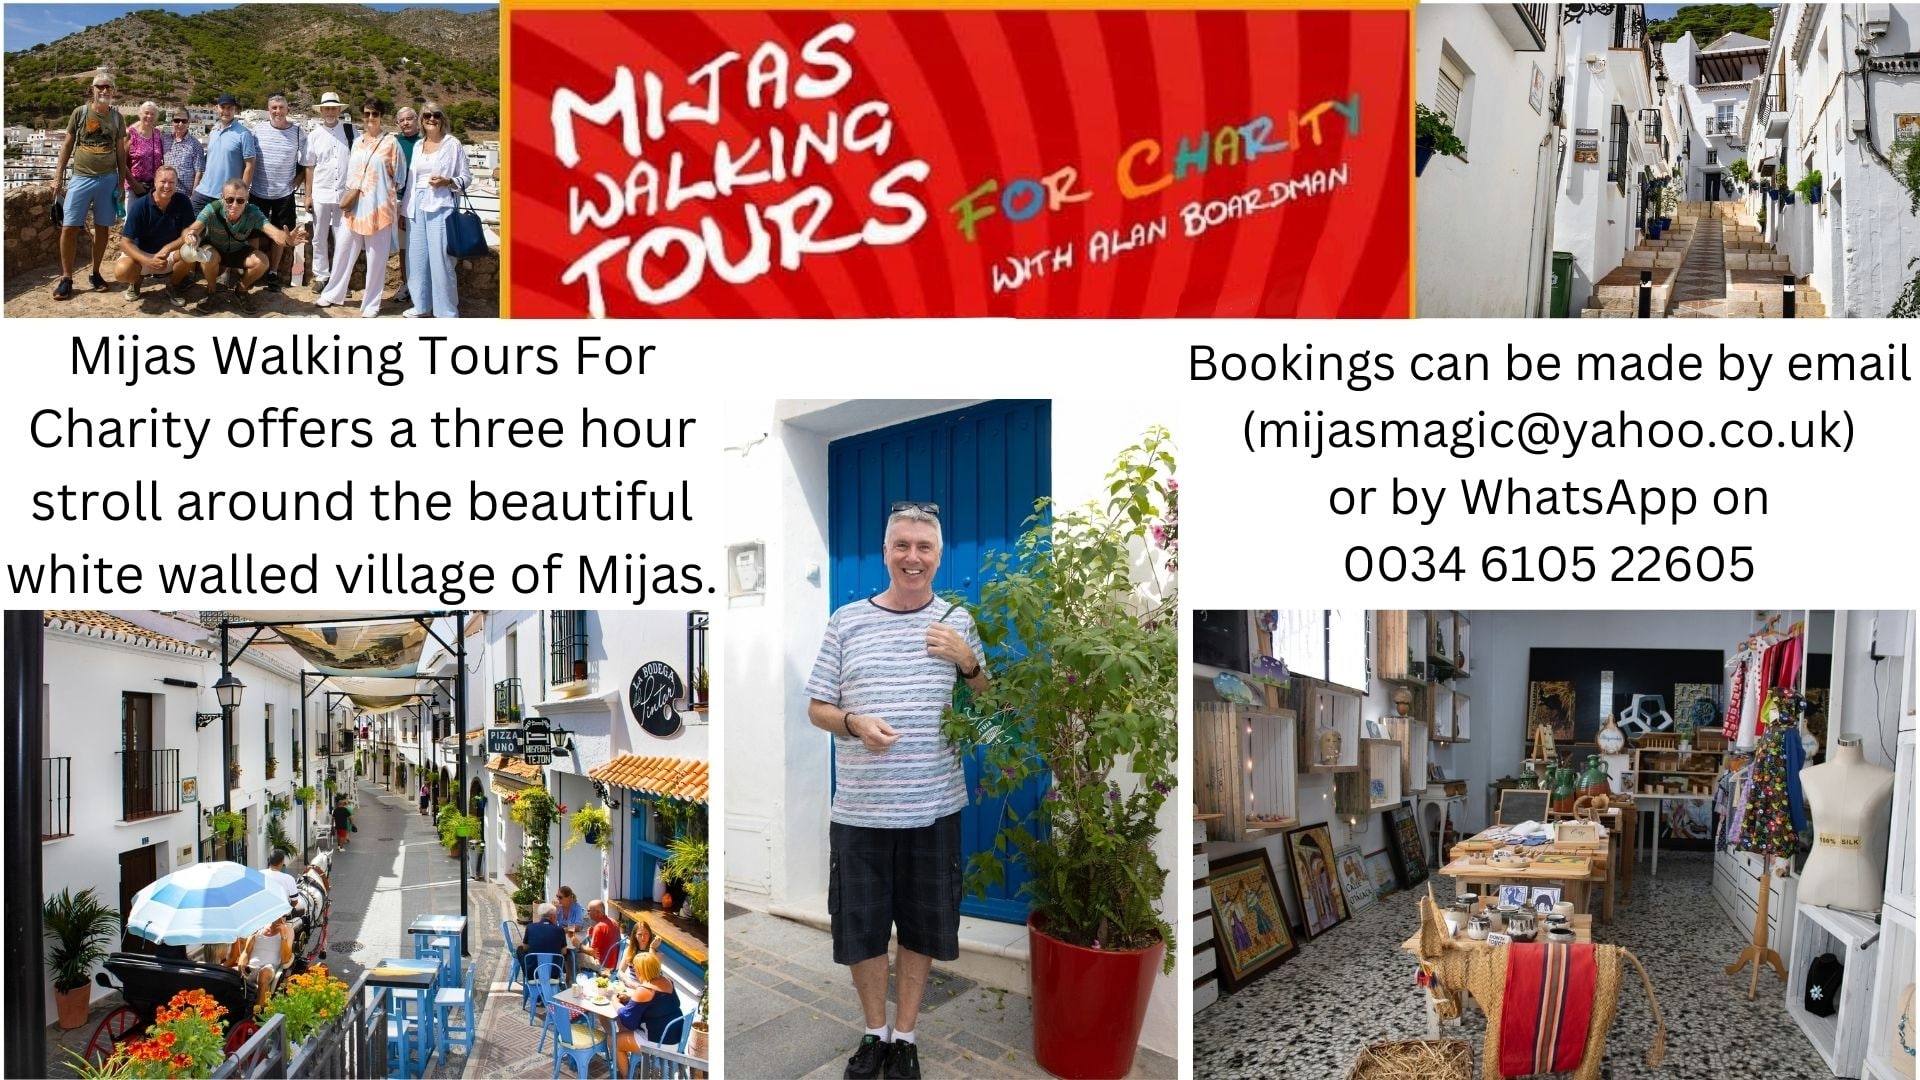 Mijas Walking Tours For Charity